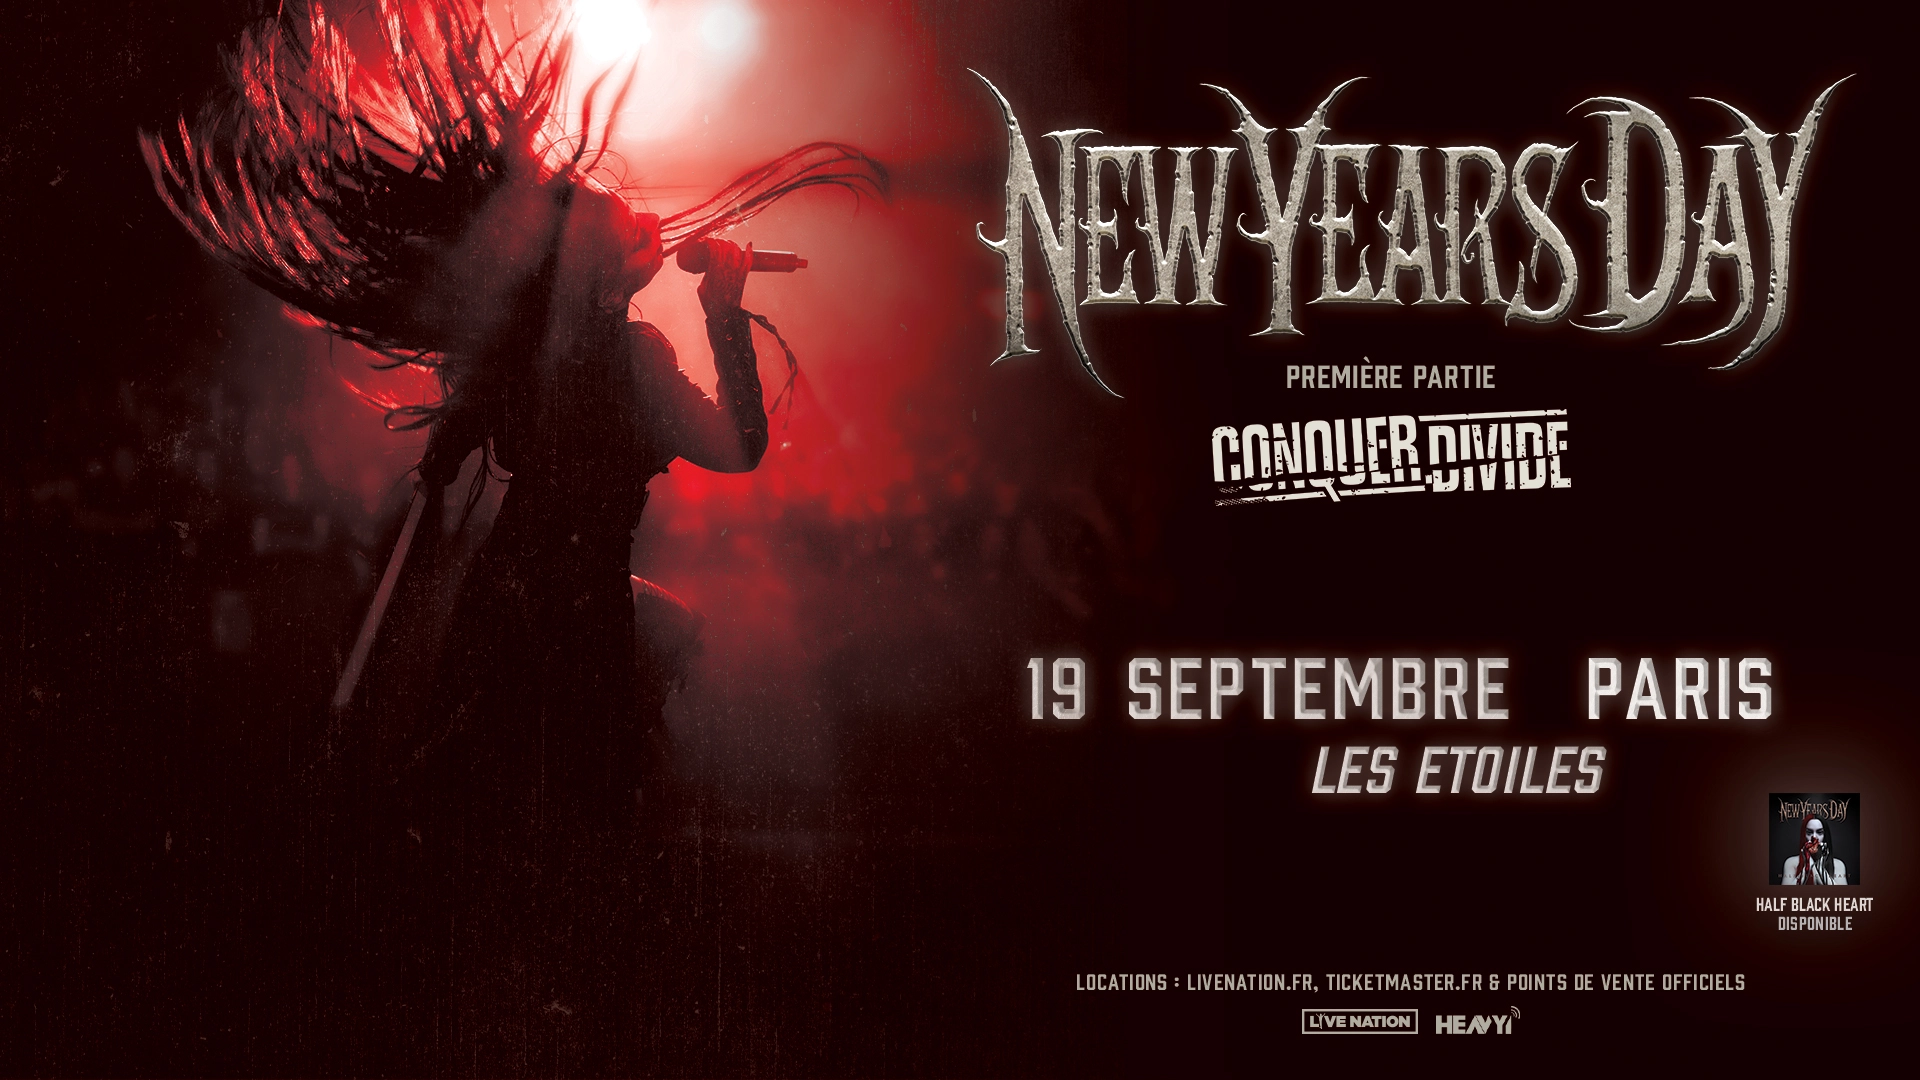 New Years Day in der Les Etoiles Tickets